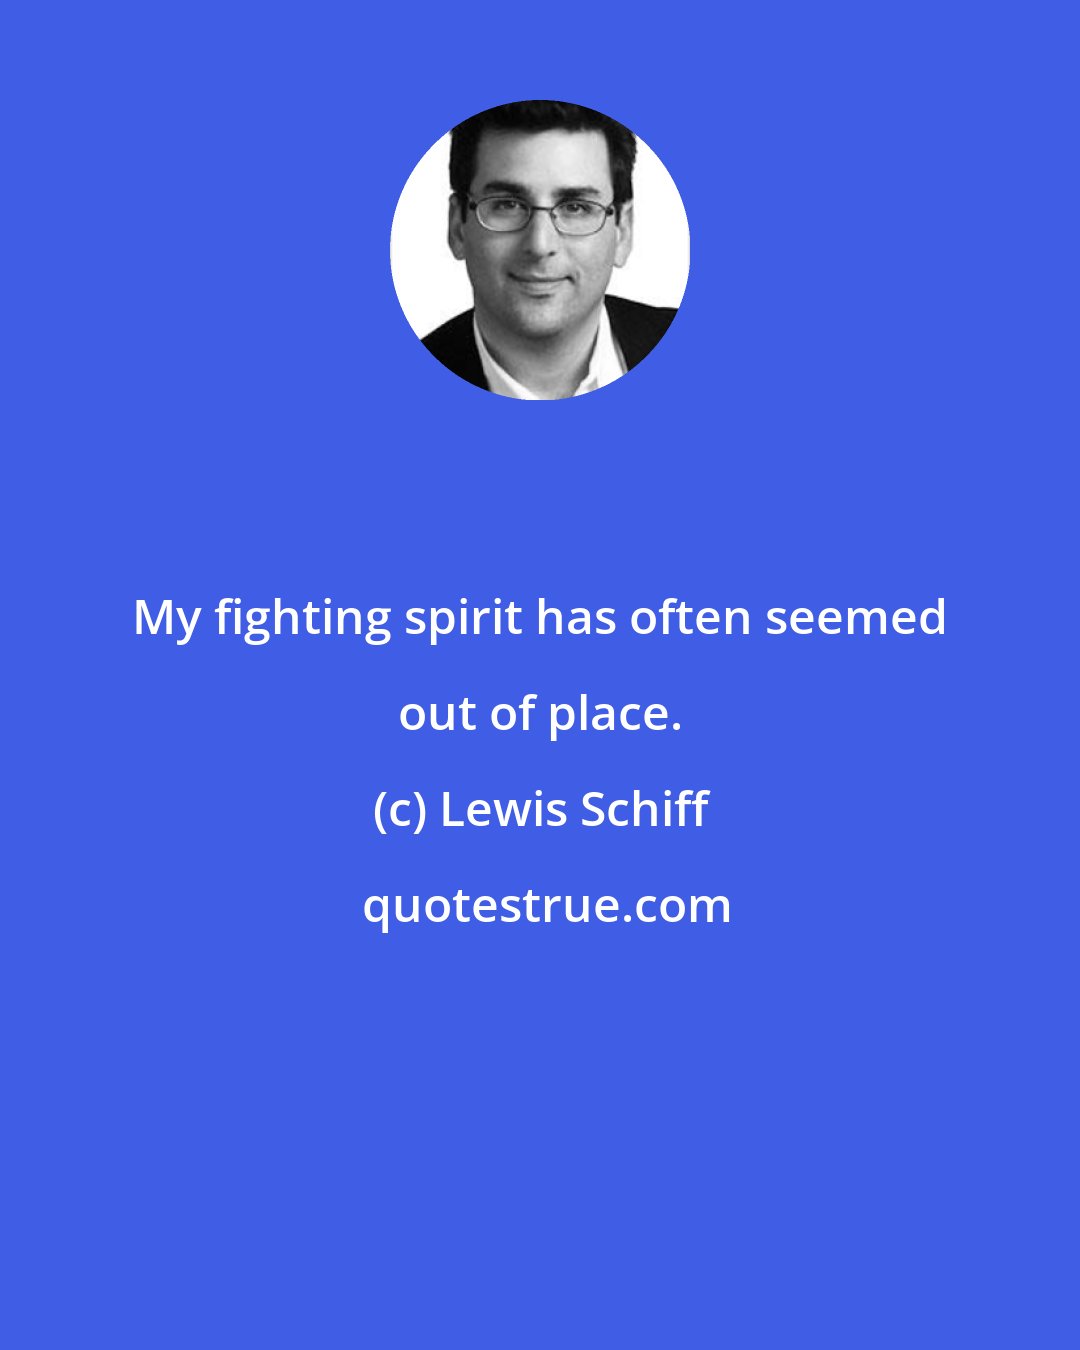 Lewis Schiff: My fighting spirit has often seemed out of place.